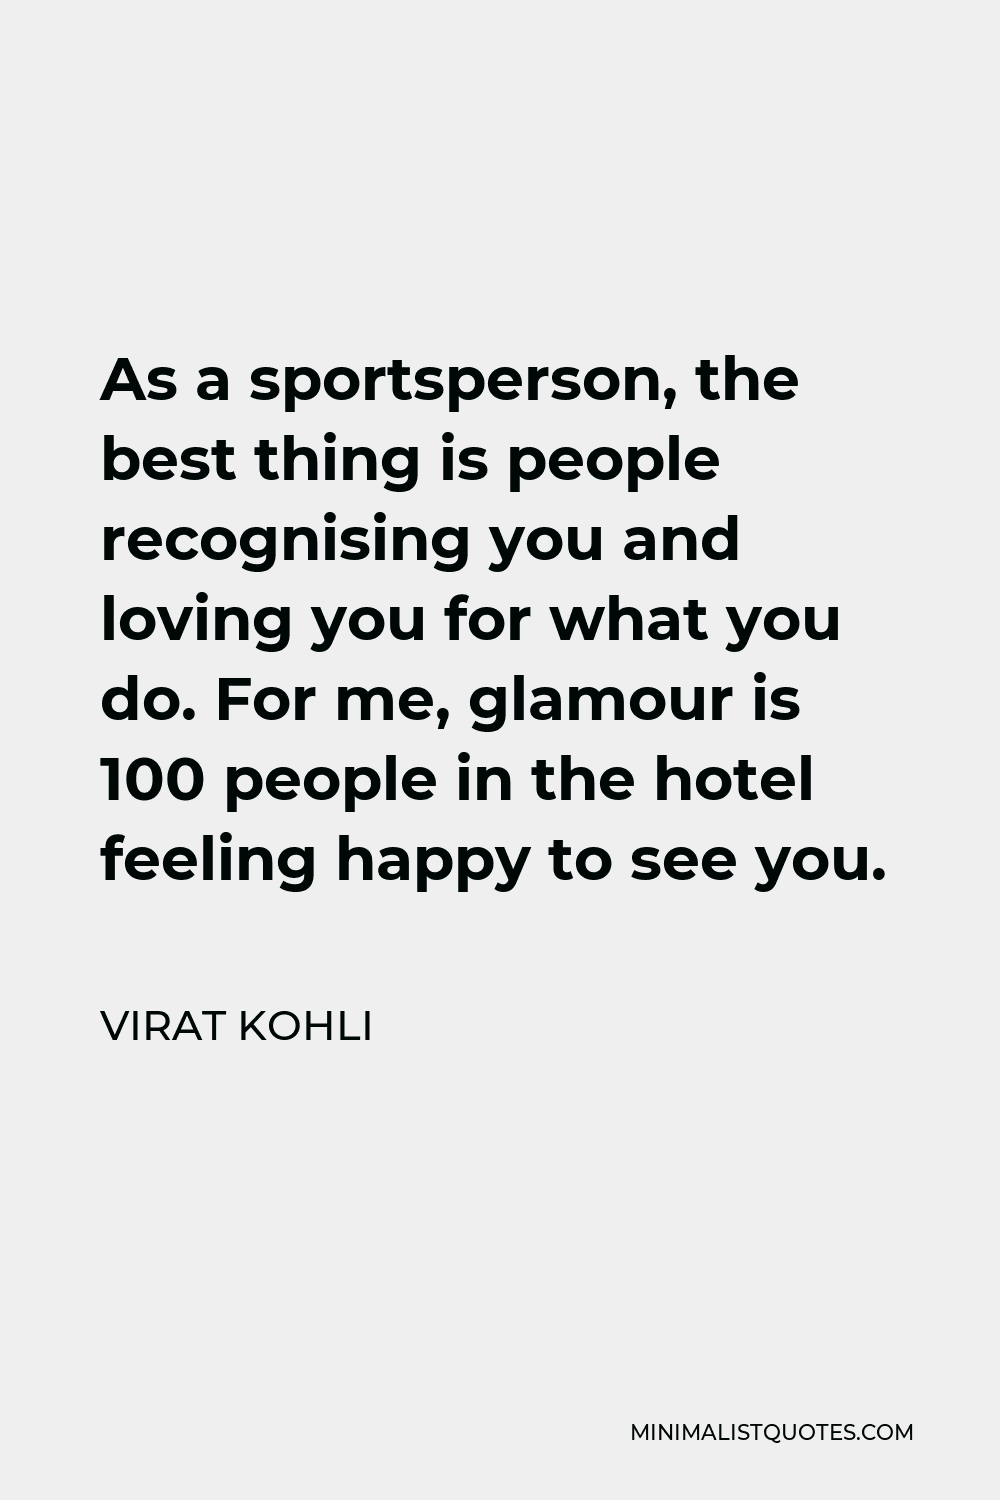 Virat Kohli Quote - As a sportsperson, the best thing is people recognising you and loving you for what you do. For me, glamour is 100 people in the hotel feeling happy to see you.